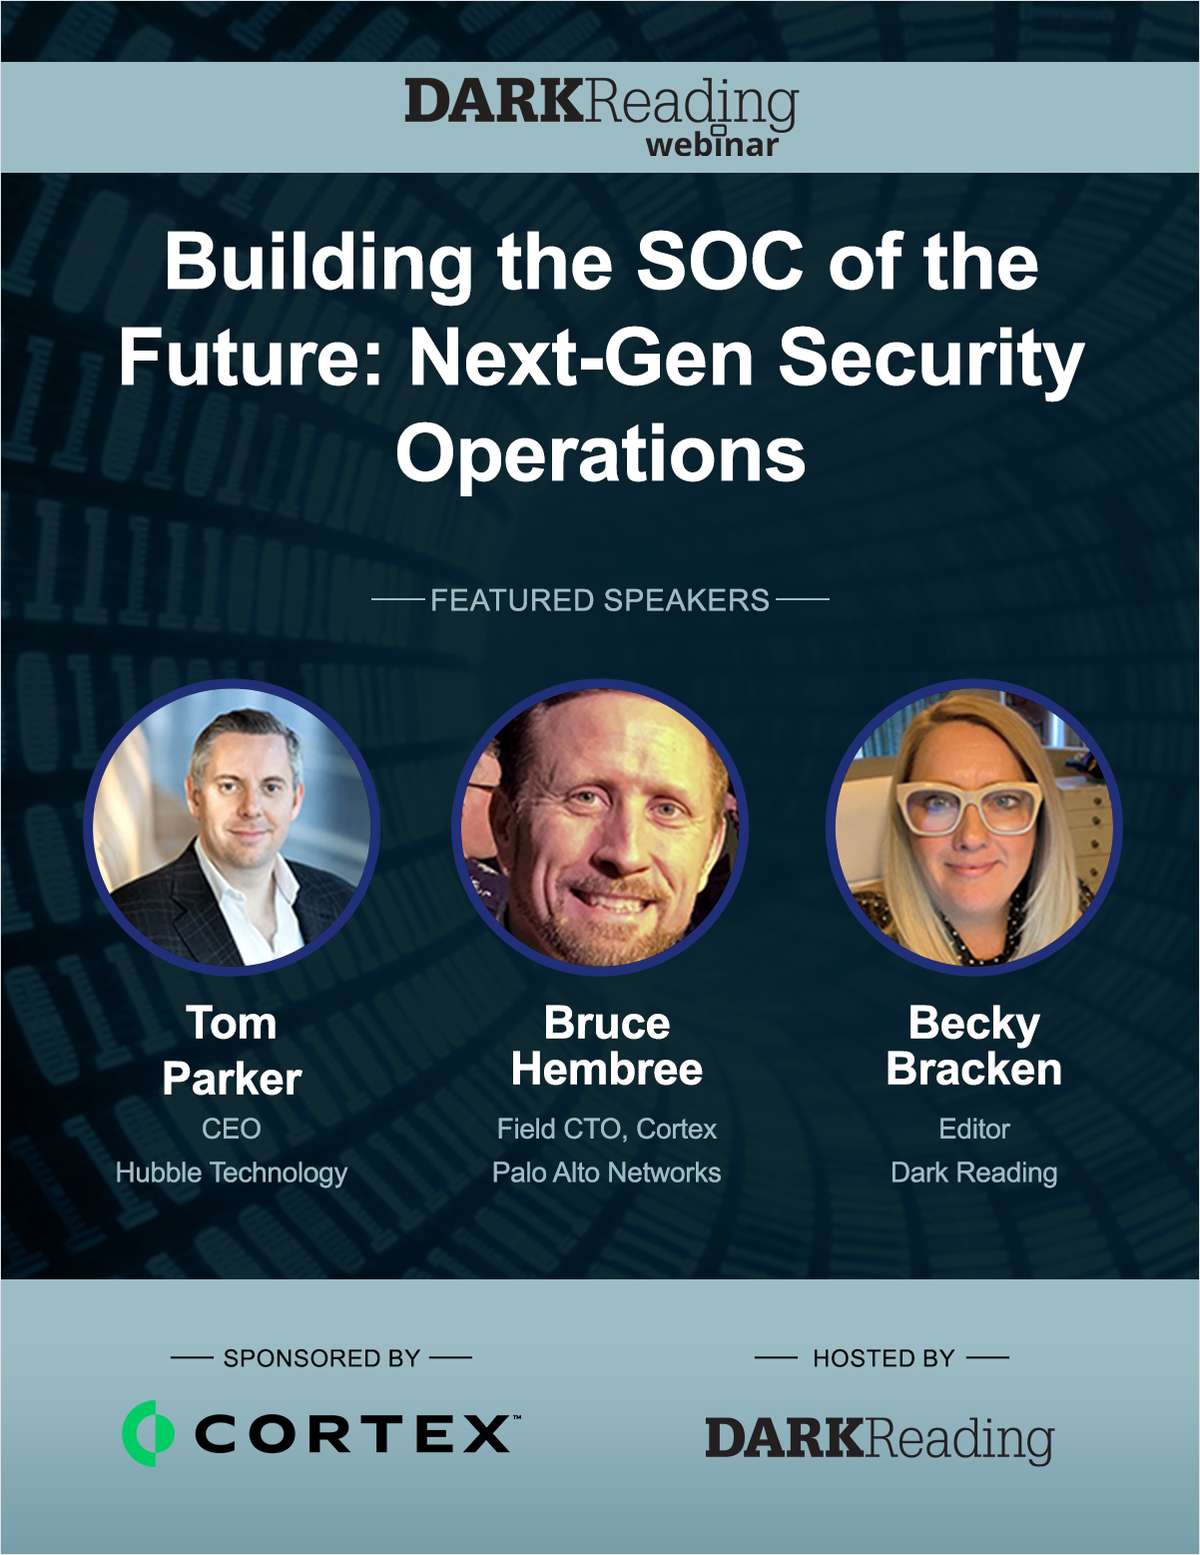 Building the SOC of the Future: Next-Gen Security Operations